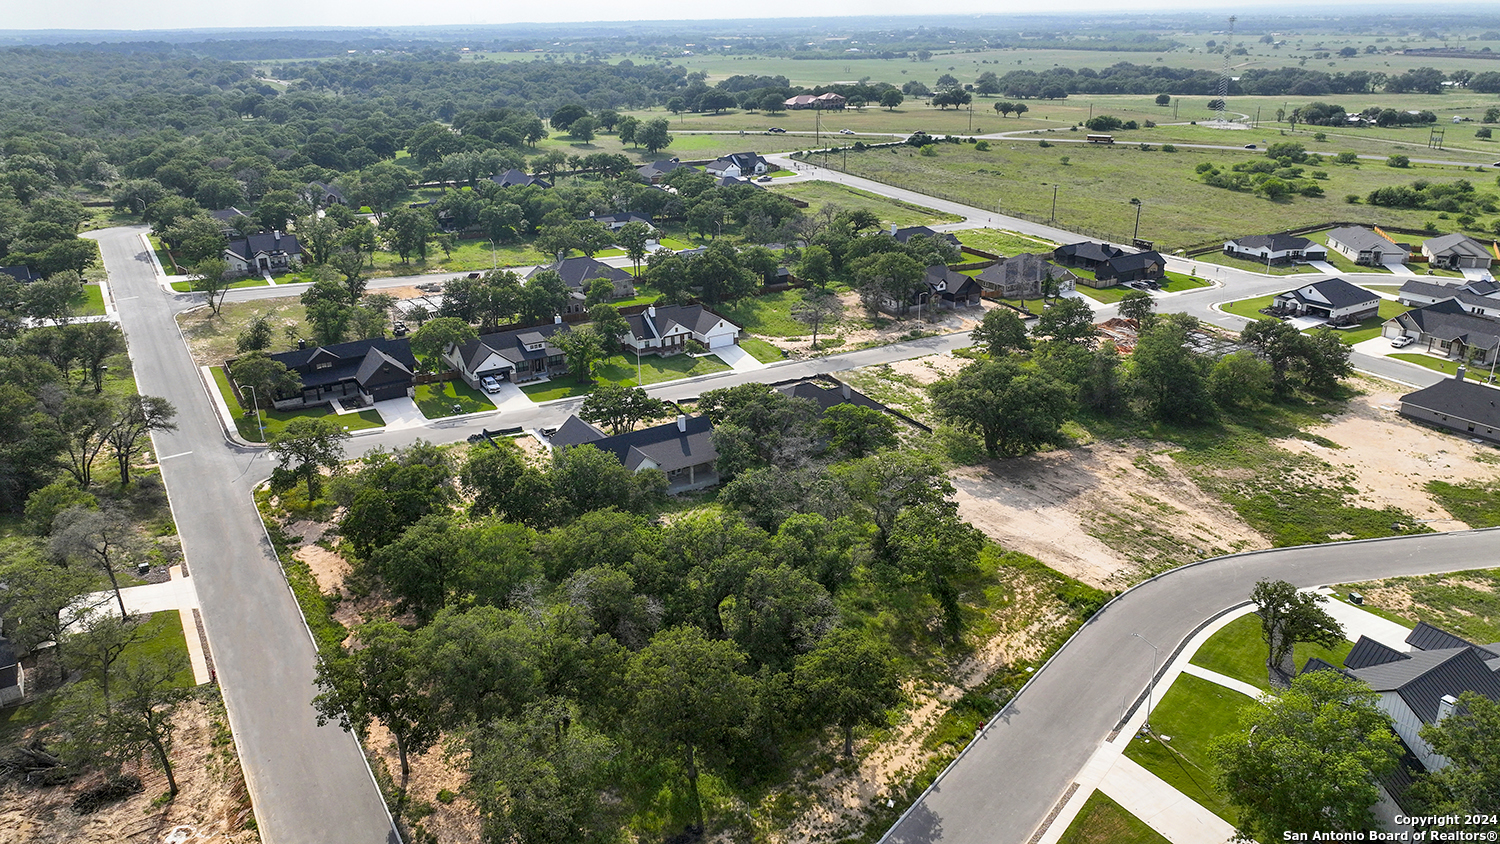 Photo of 124 Chinaberry Hl in La Vernia, TX